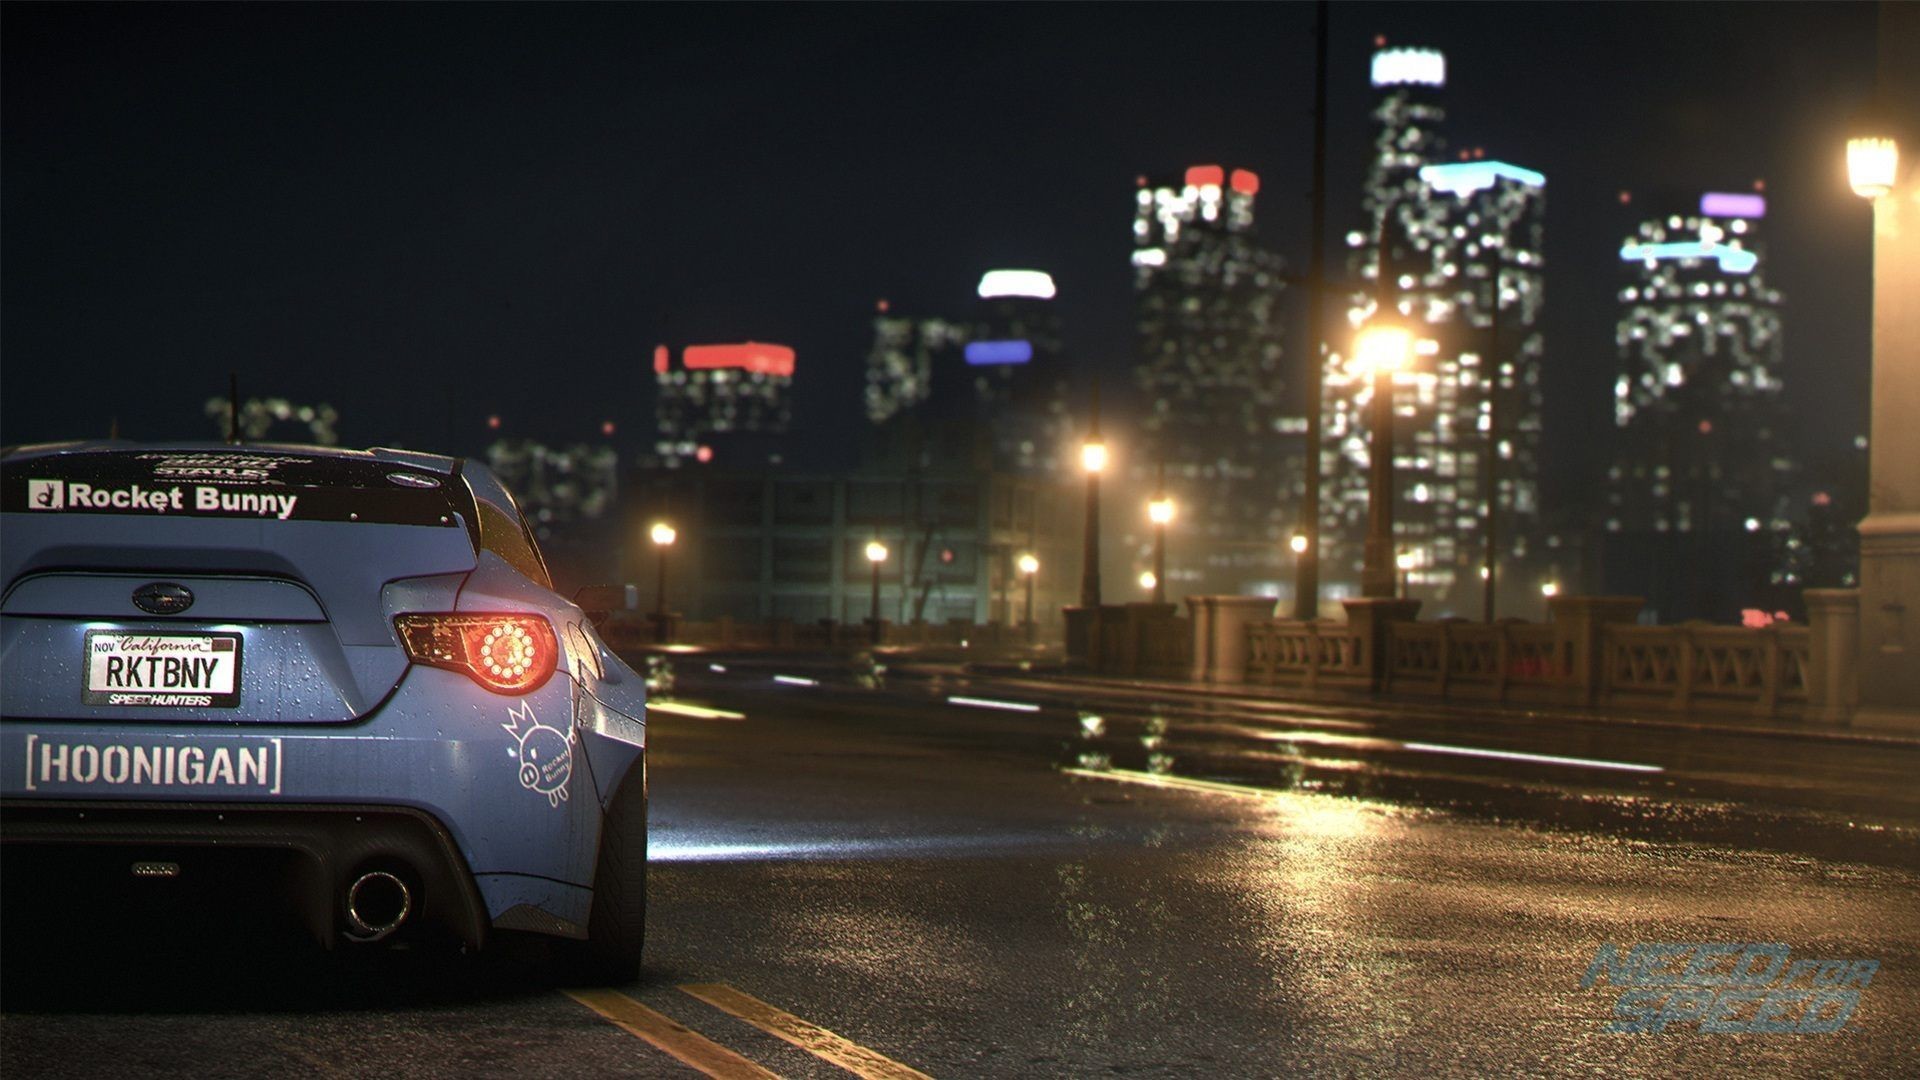 1920x1080 Need For Speed 2015 Gaming Wallpaper Download For PC